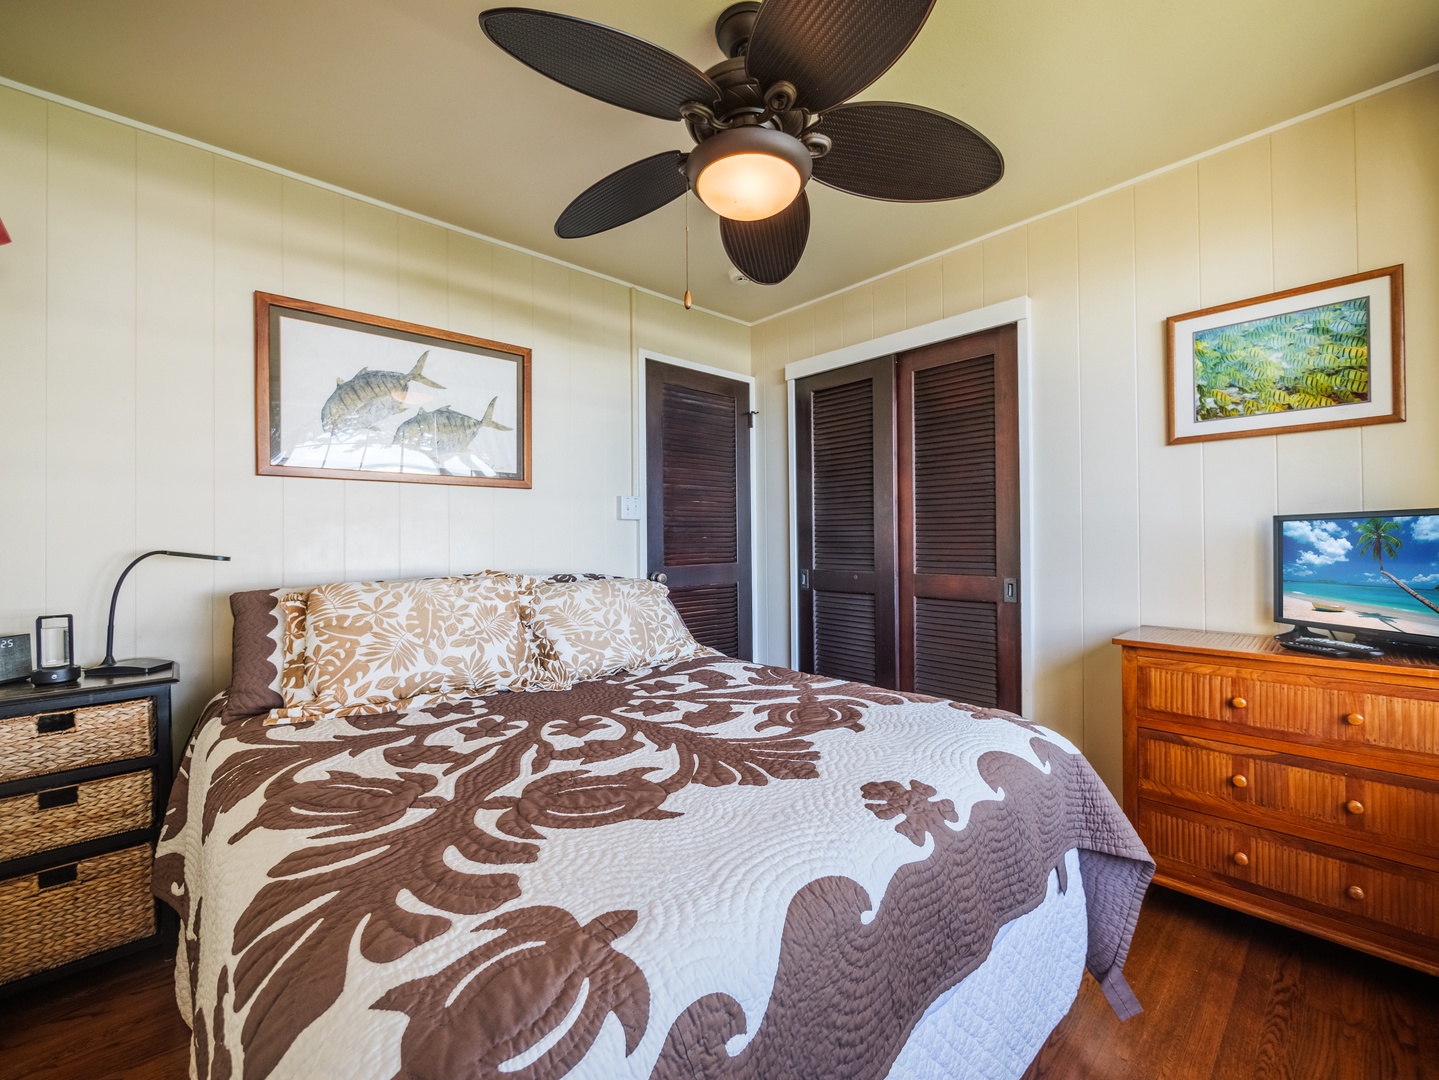 Haleiwa Vacation Rentals, Sunset Point Hawaiian Beachfront** - Guest bedroom with a plush king bed.